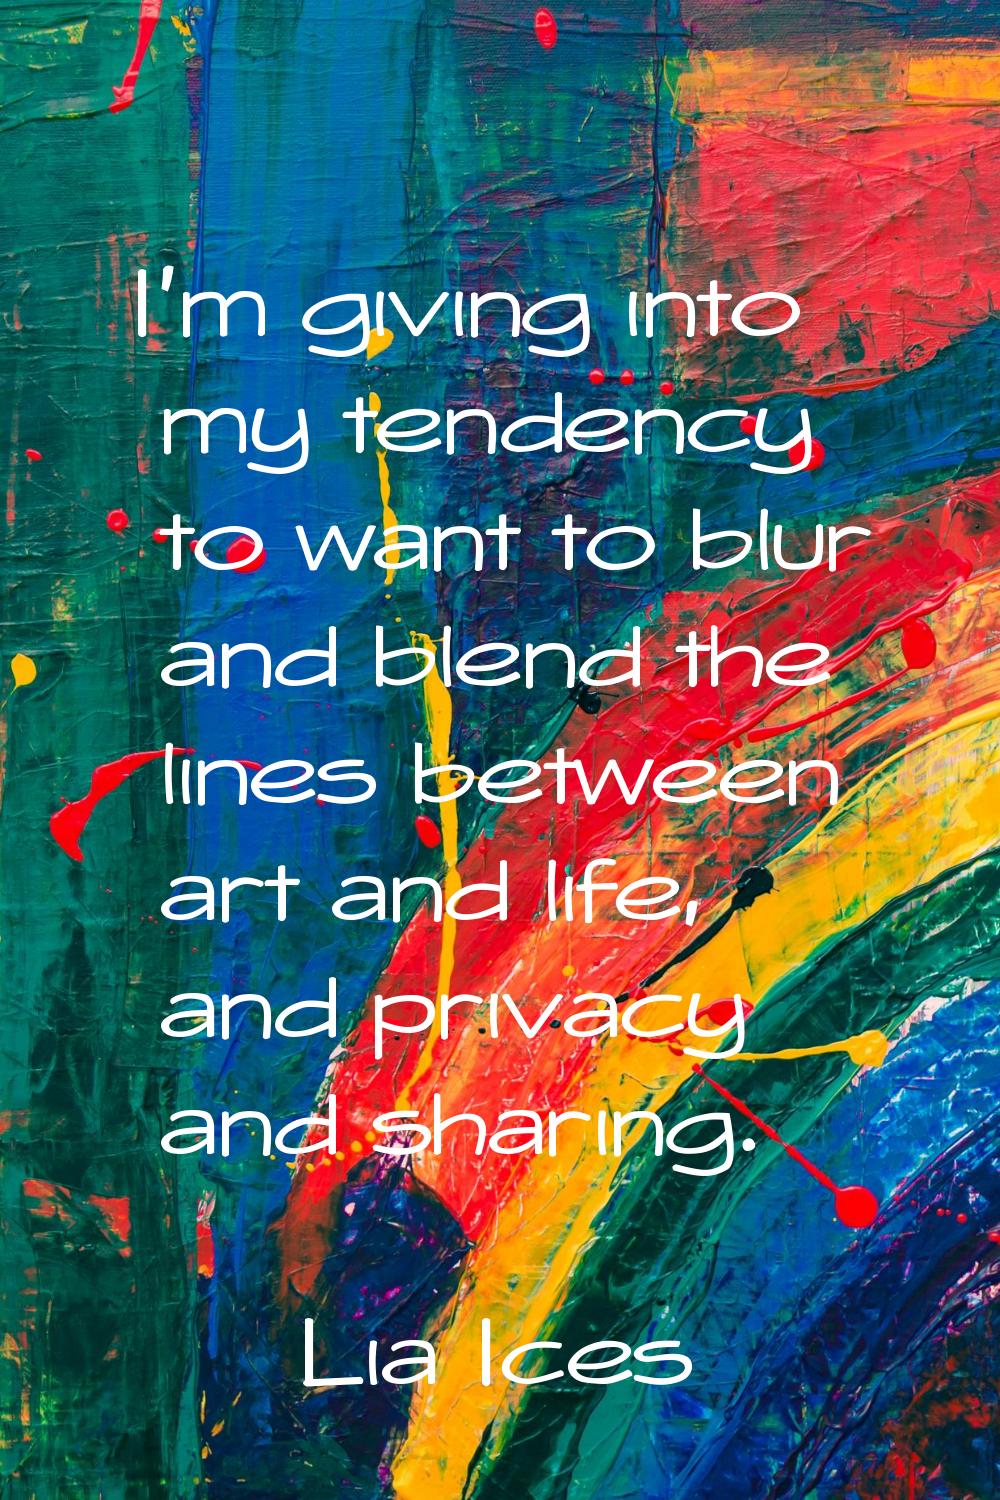 I'm giving into my tendency to want to blur and blend the lines between art and life, and privacy a